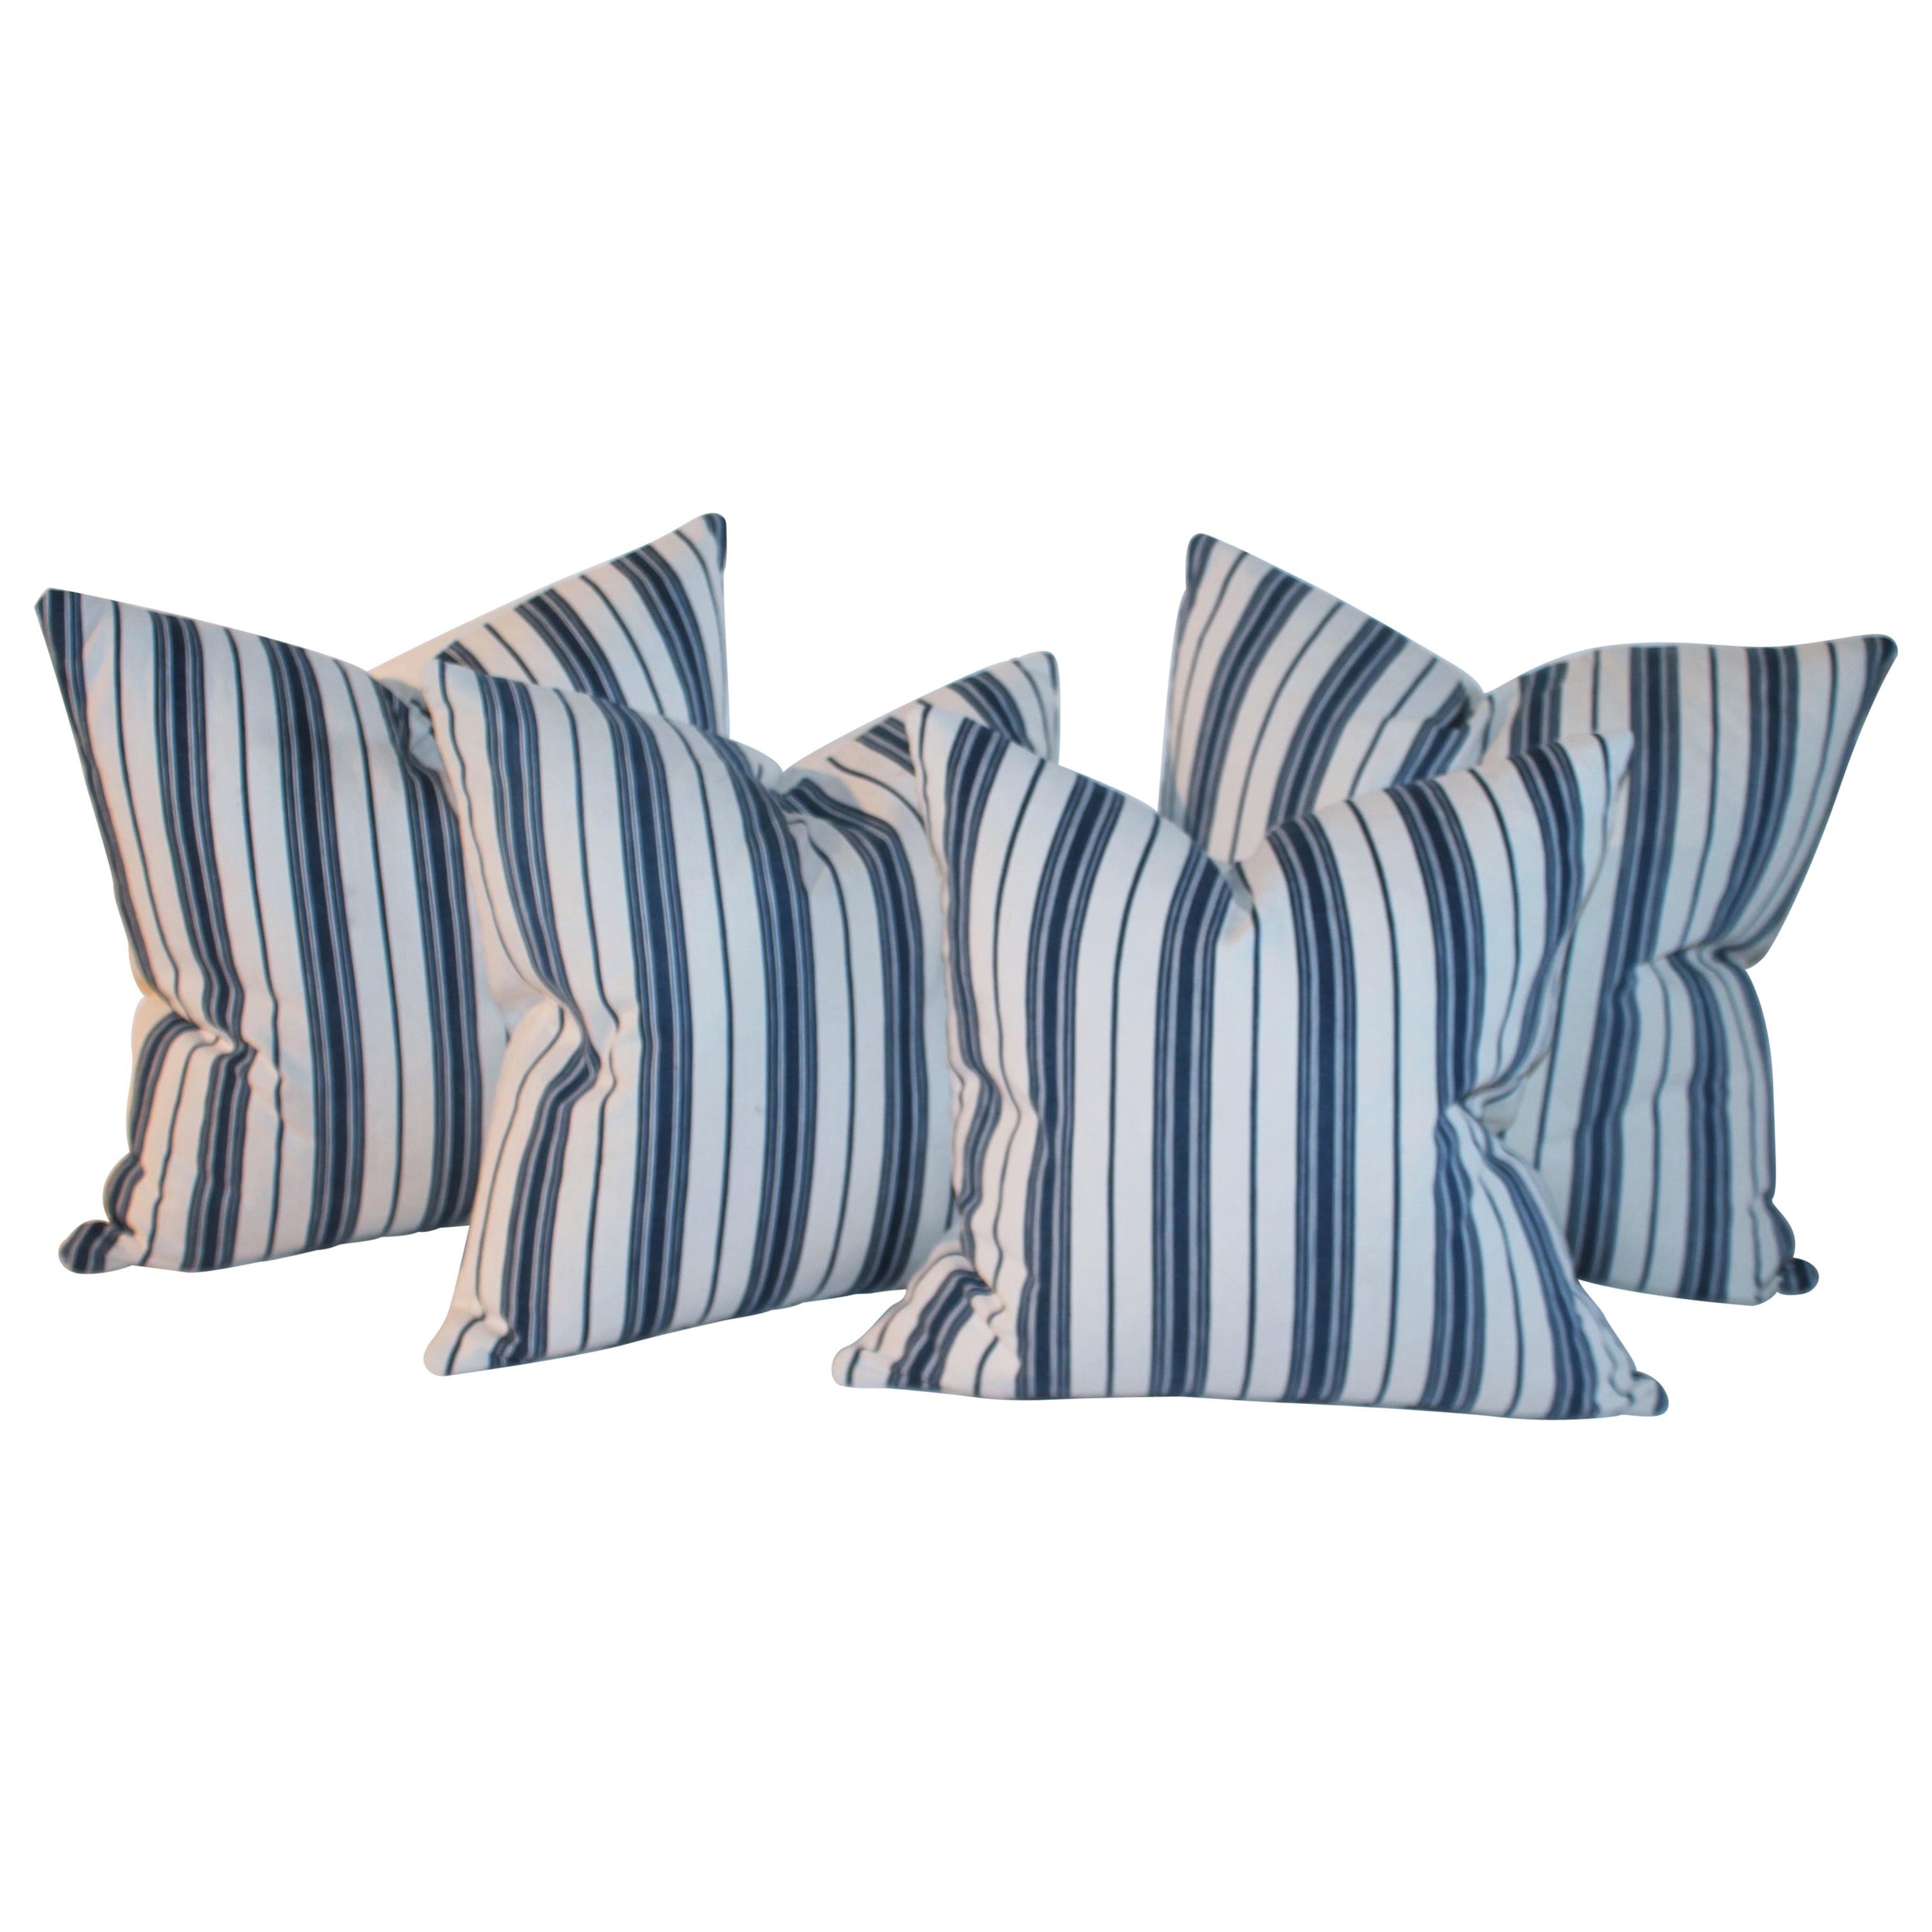 Collection of 19thc Blue & White Ticking Pillows